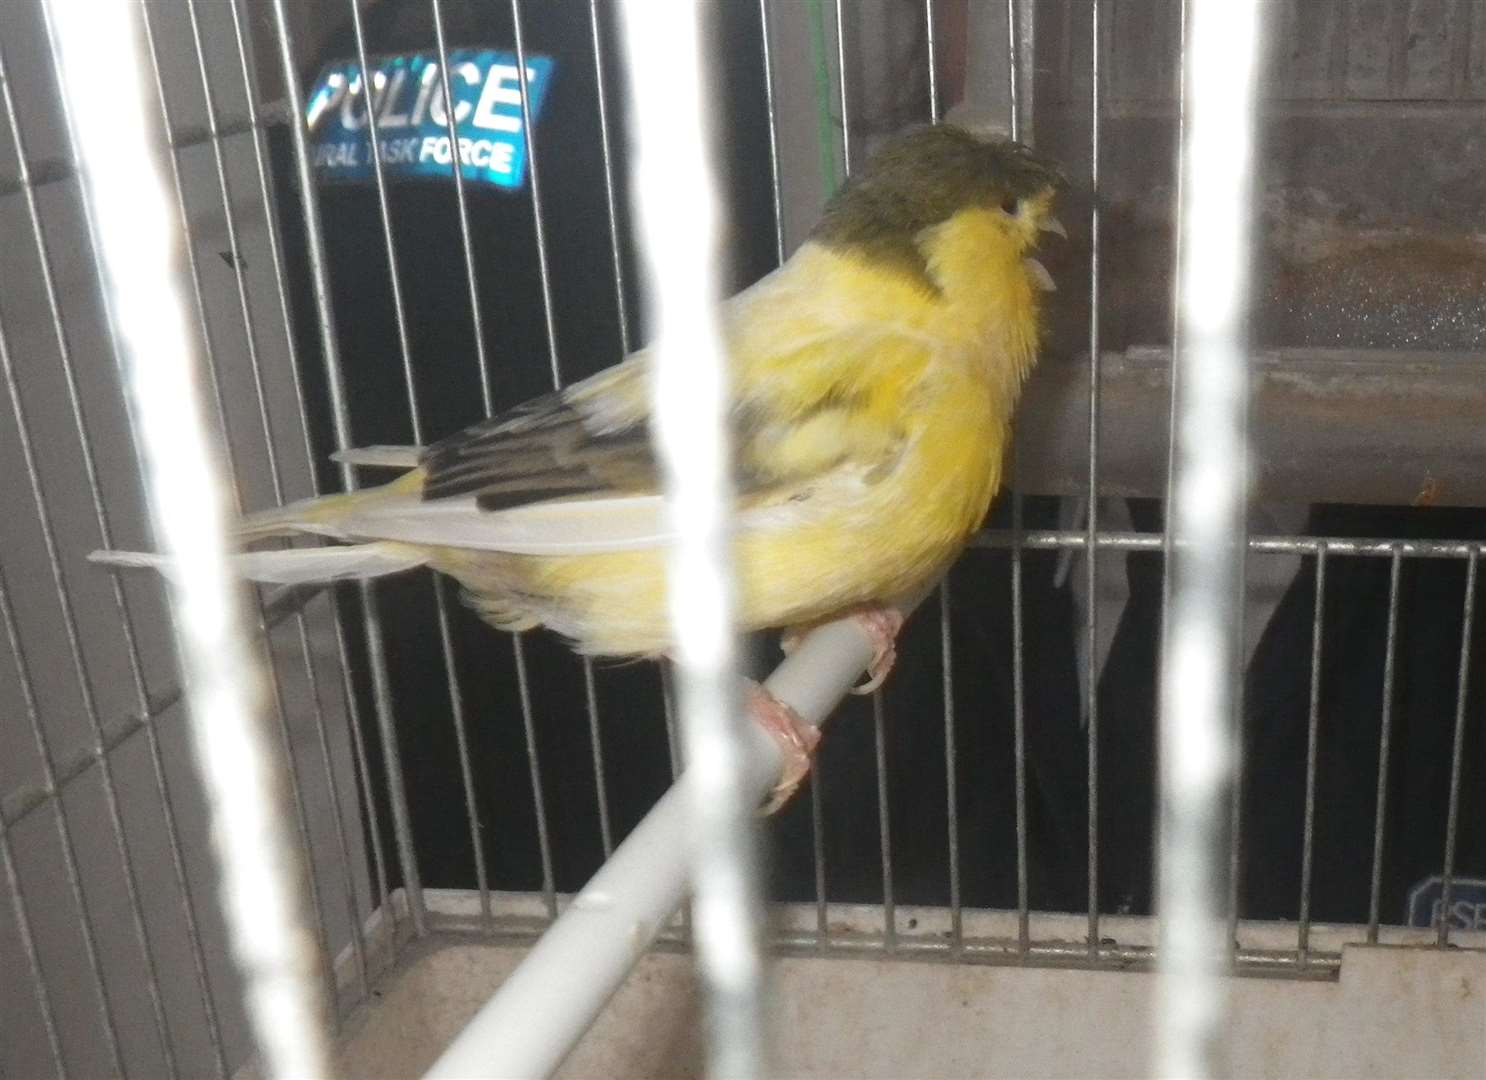 Elvis the canary was found at the home. Picture: RSPCA